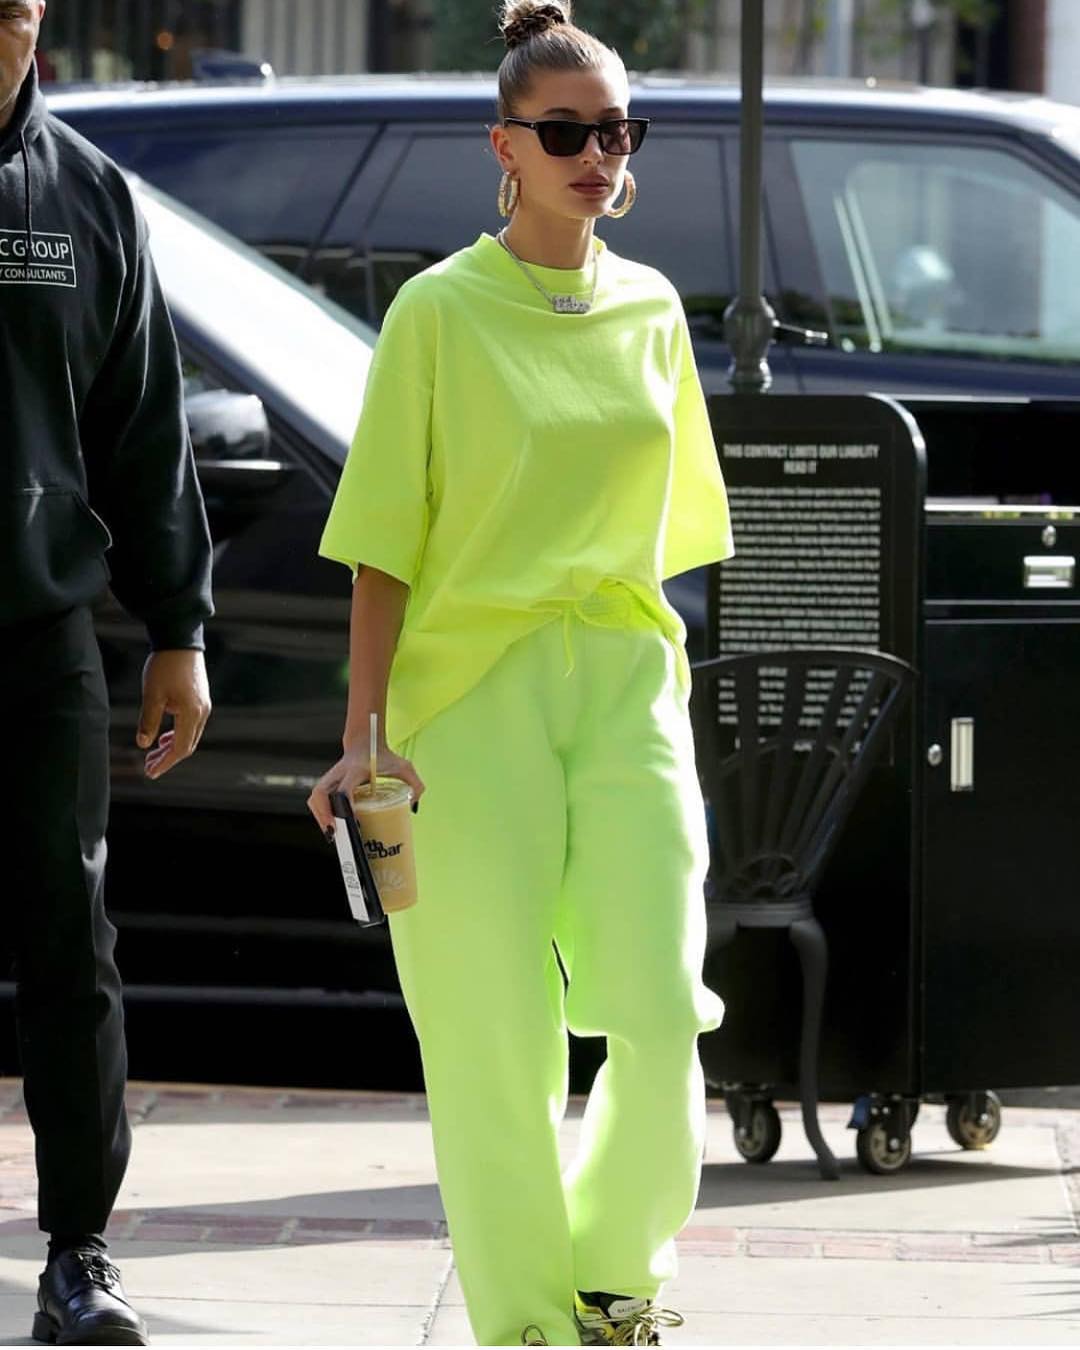 SPOTTED: Hailey Bieber Opts for All Neon in West Hollywood